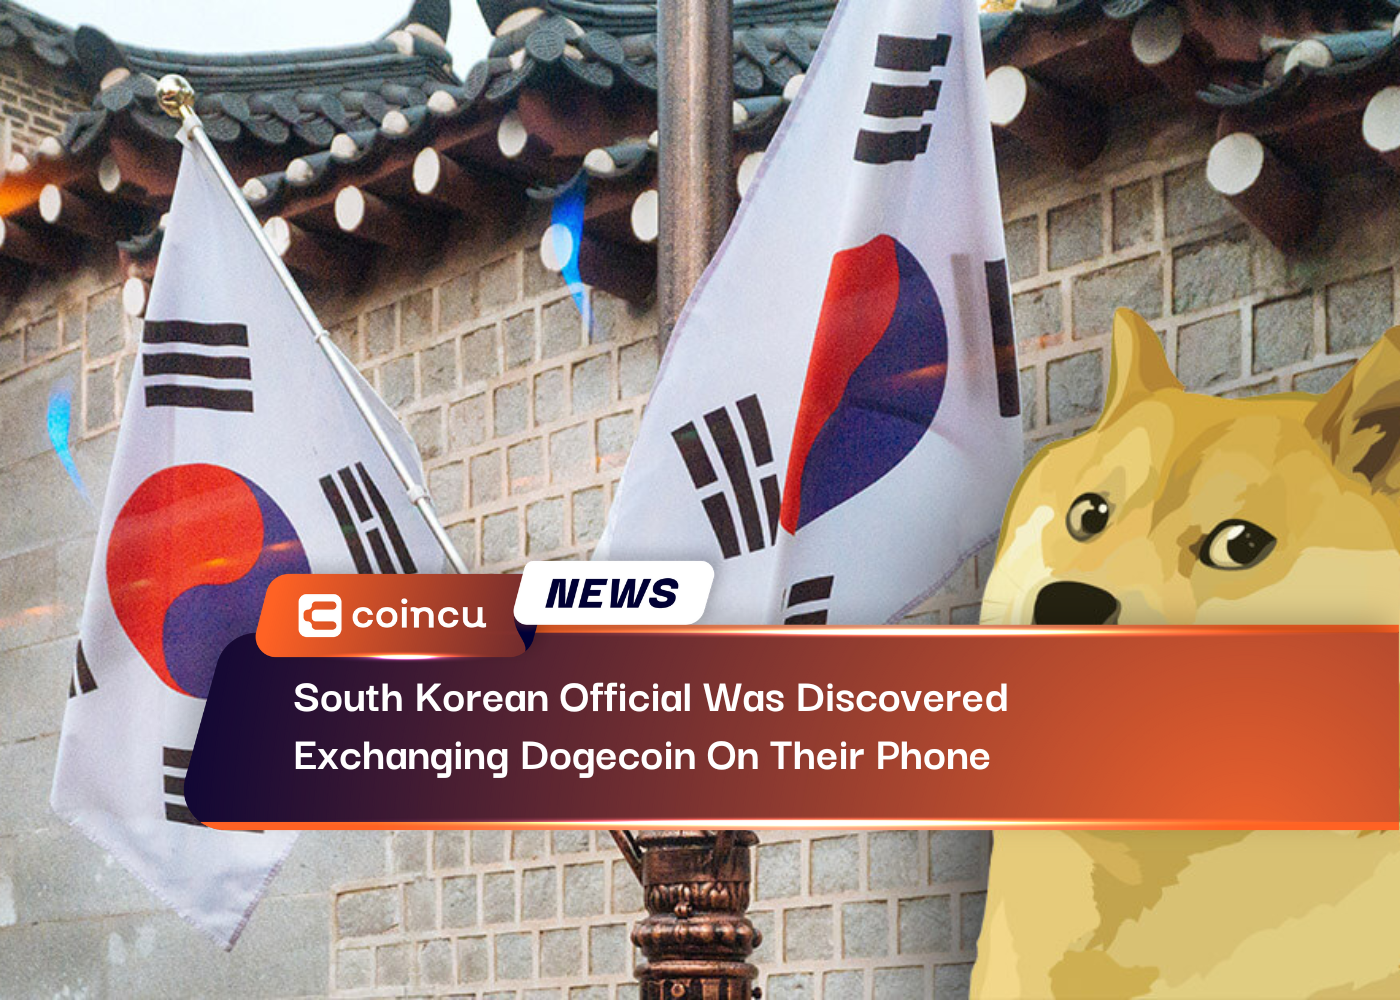 South Korean Official Was Discovered Exchanging Dogecoin